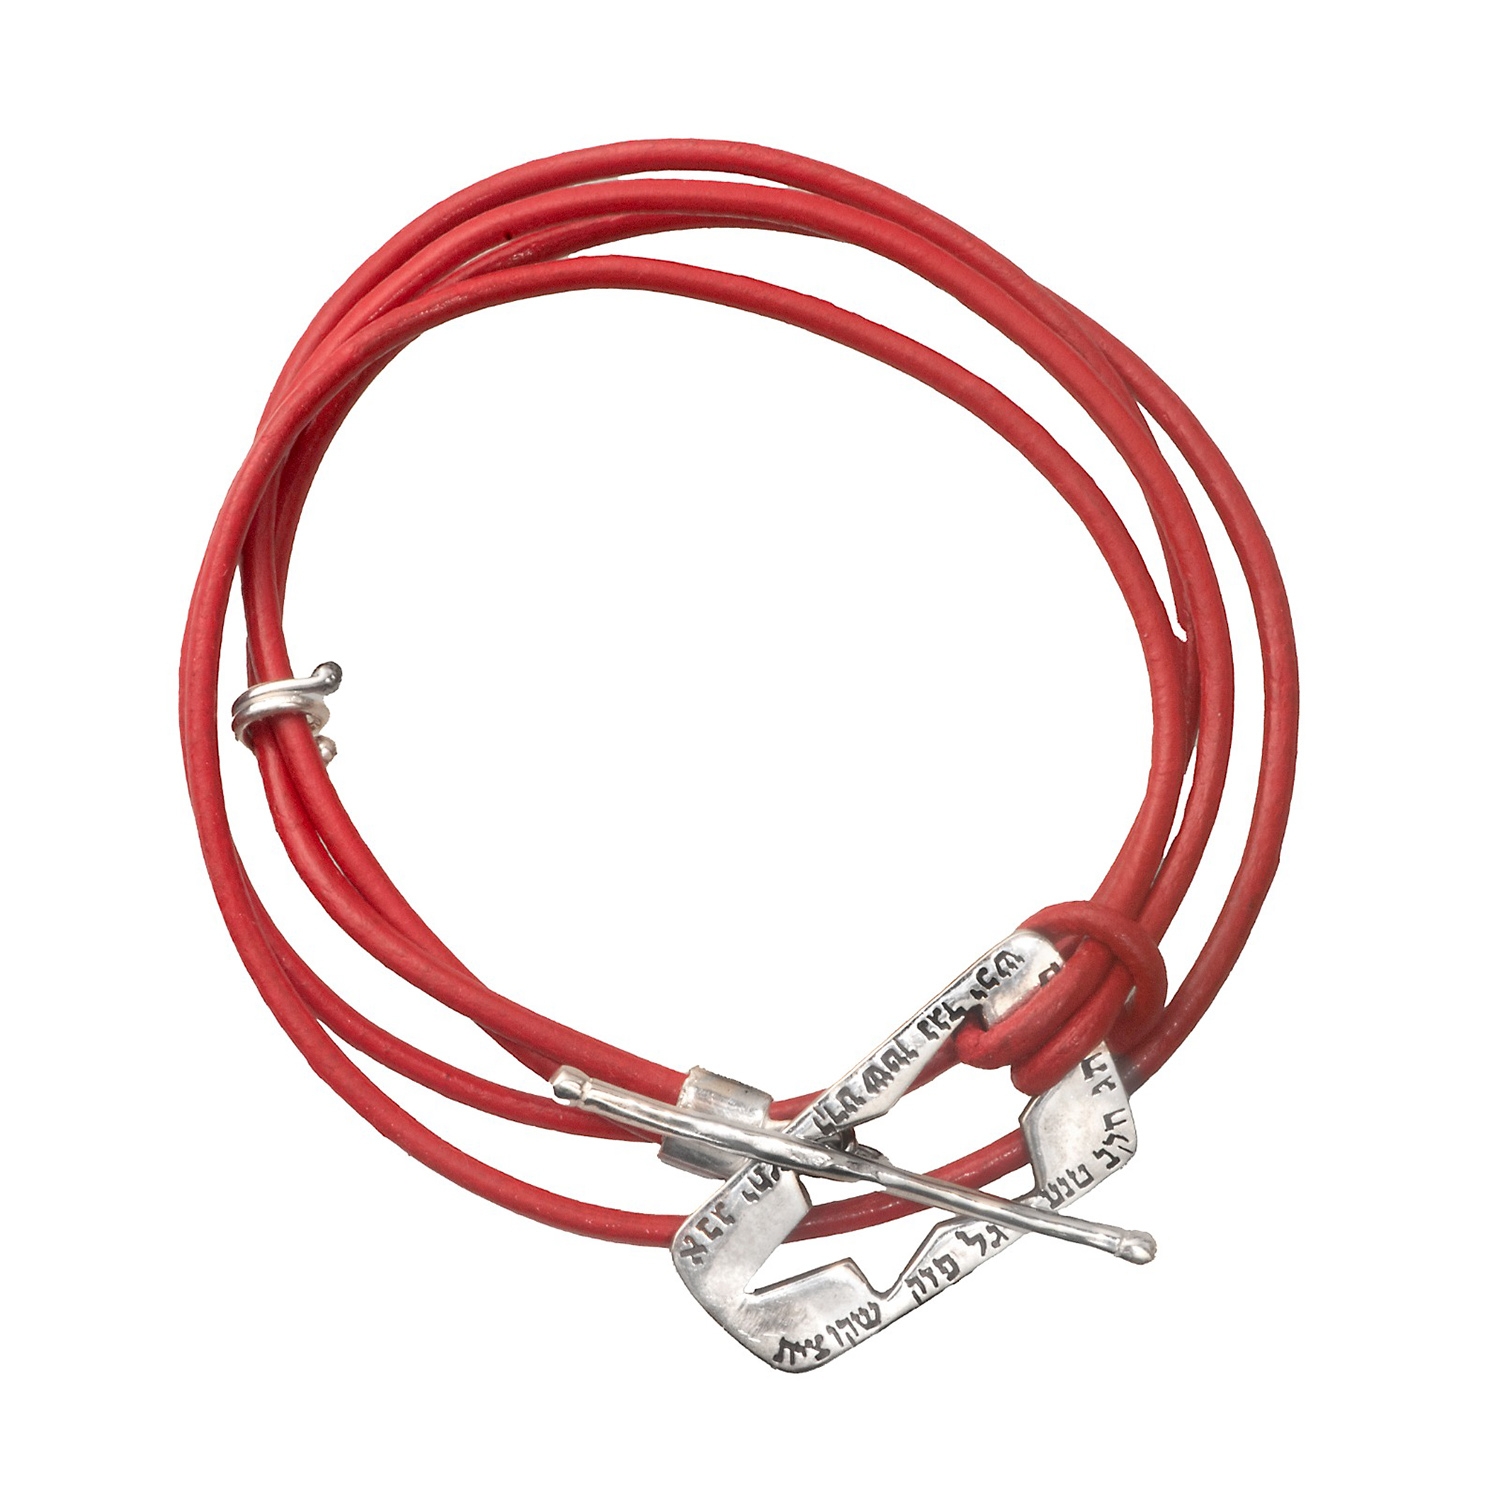 Ana Bekoach: Silver and Red Leather Kabbalah Bracelet  - Star of David - 1